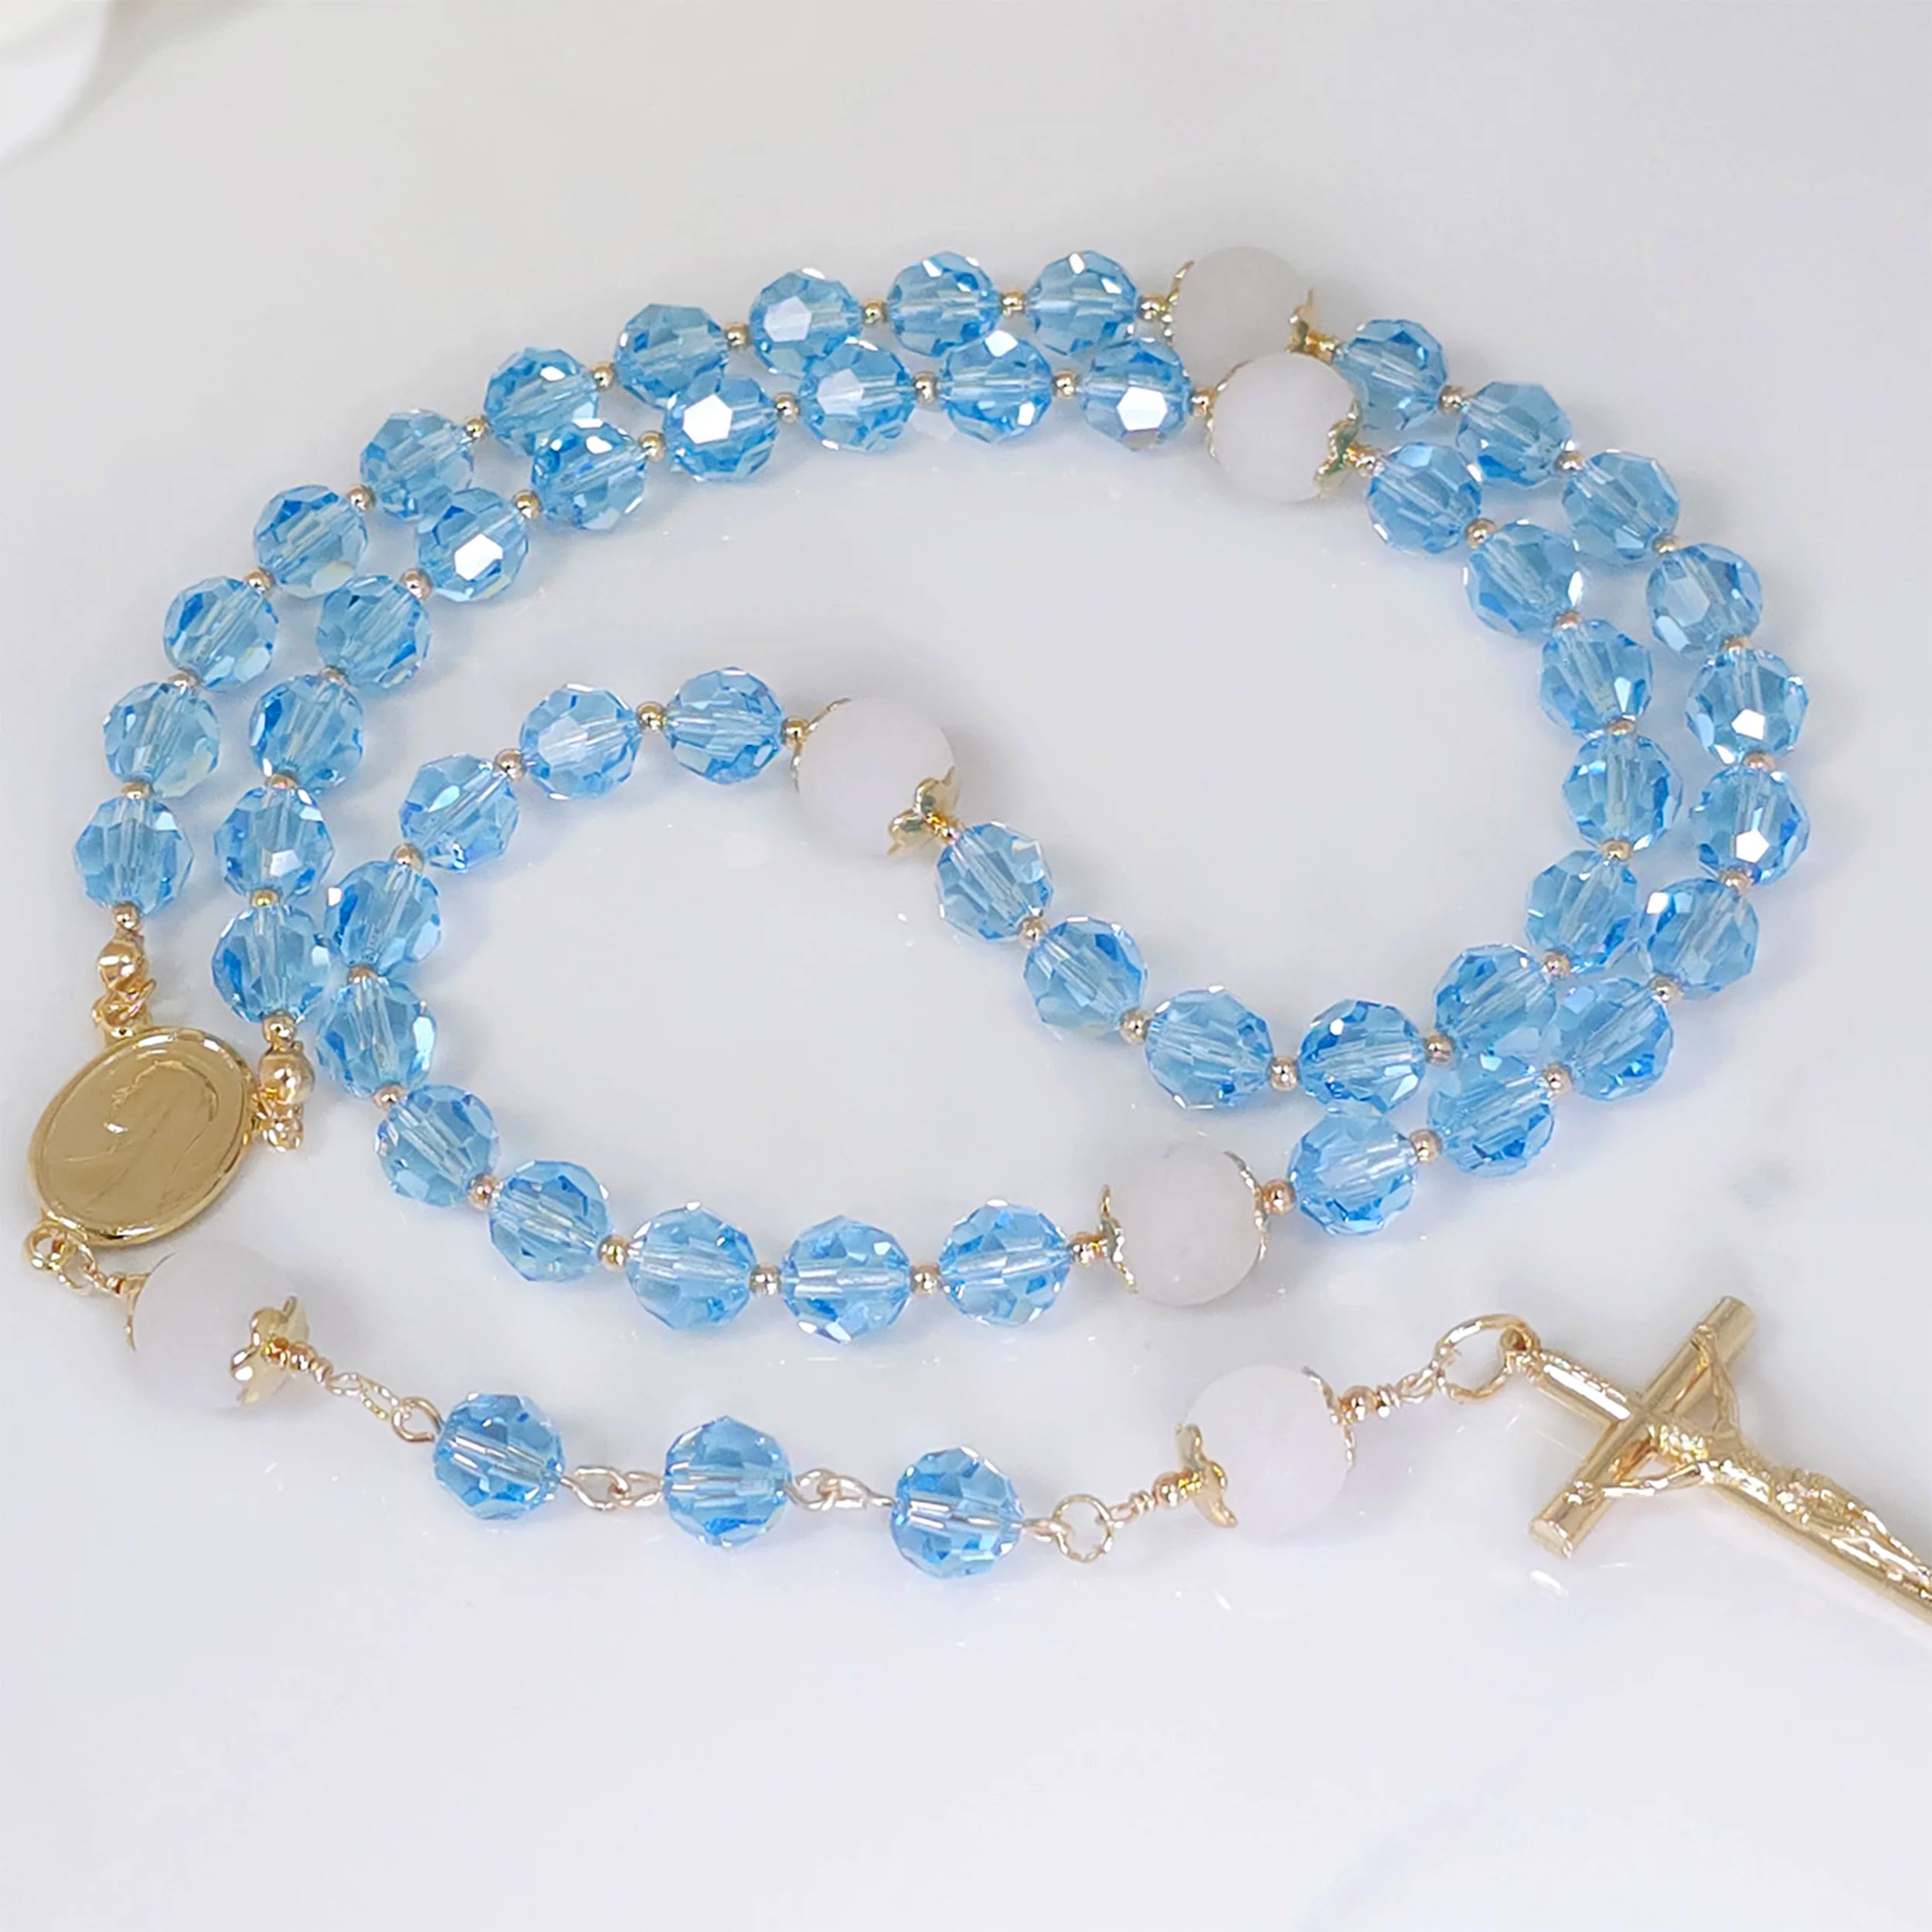 Aquamarine Austrian Crystal Rosary Necklace with 8 mm Blue Aquamarine beads, gracefully displayed on a table.